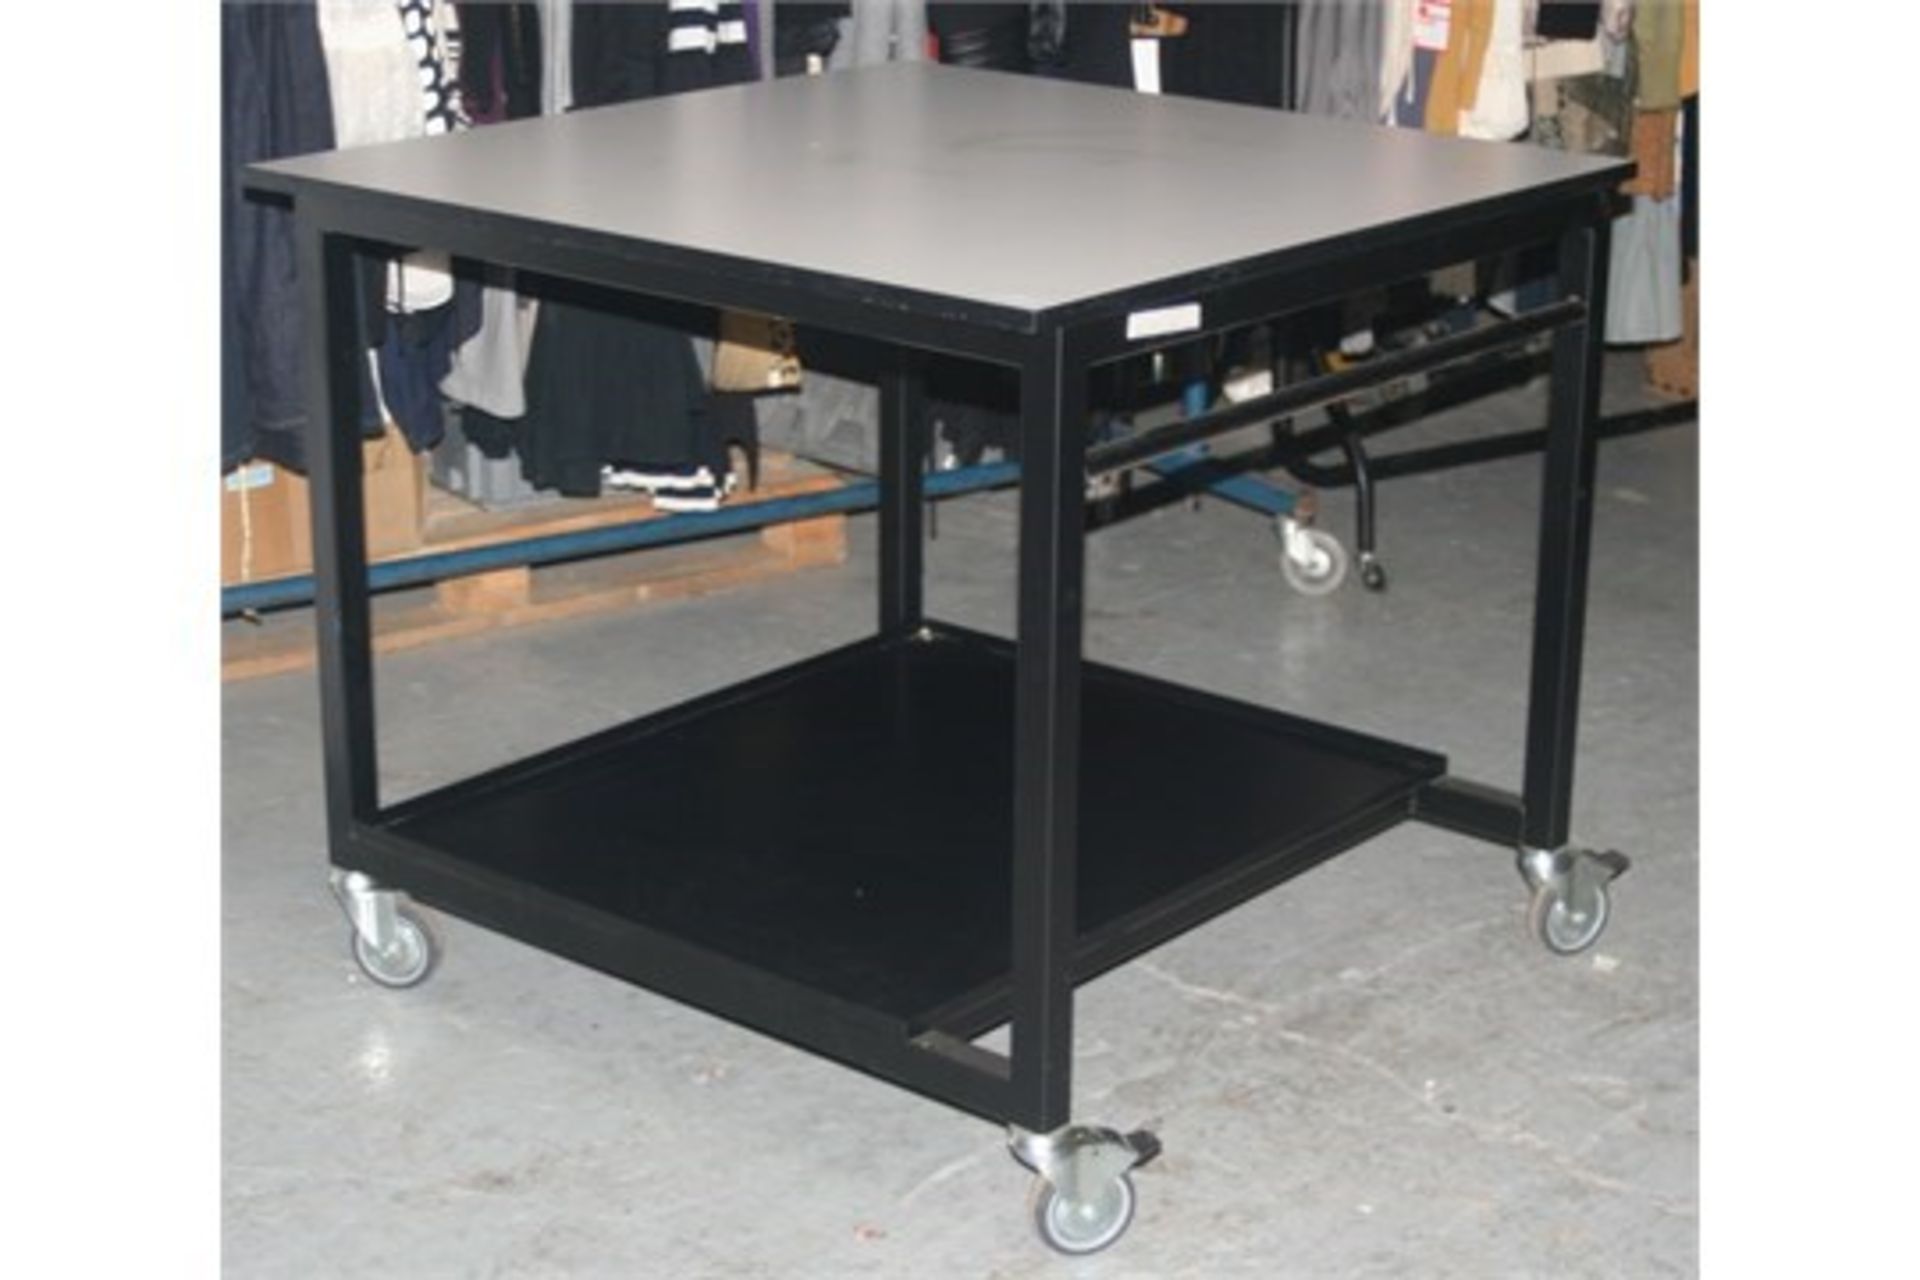 1 x Mobile Work Table - Large Size With Undershelf and Heavy Duty Castor Wheels - Strong Build - Image 5 of 8